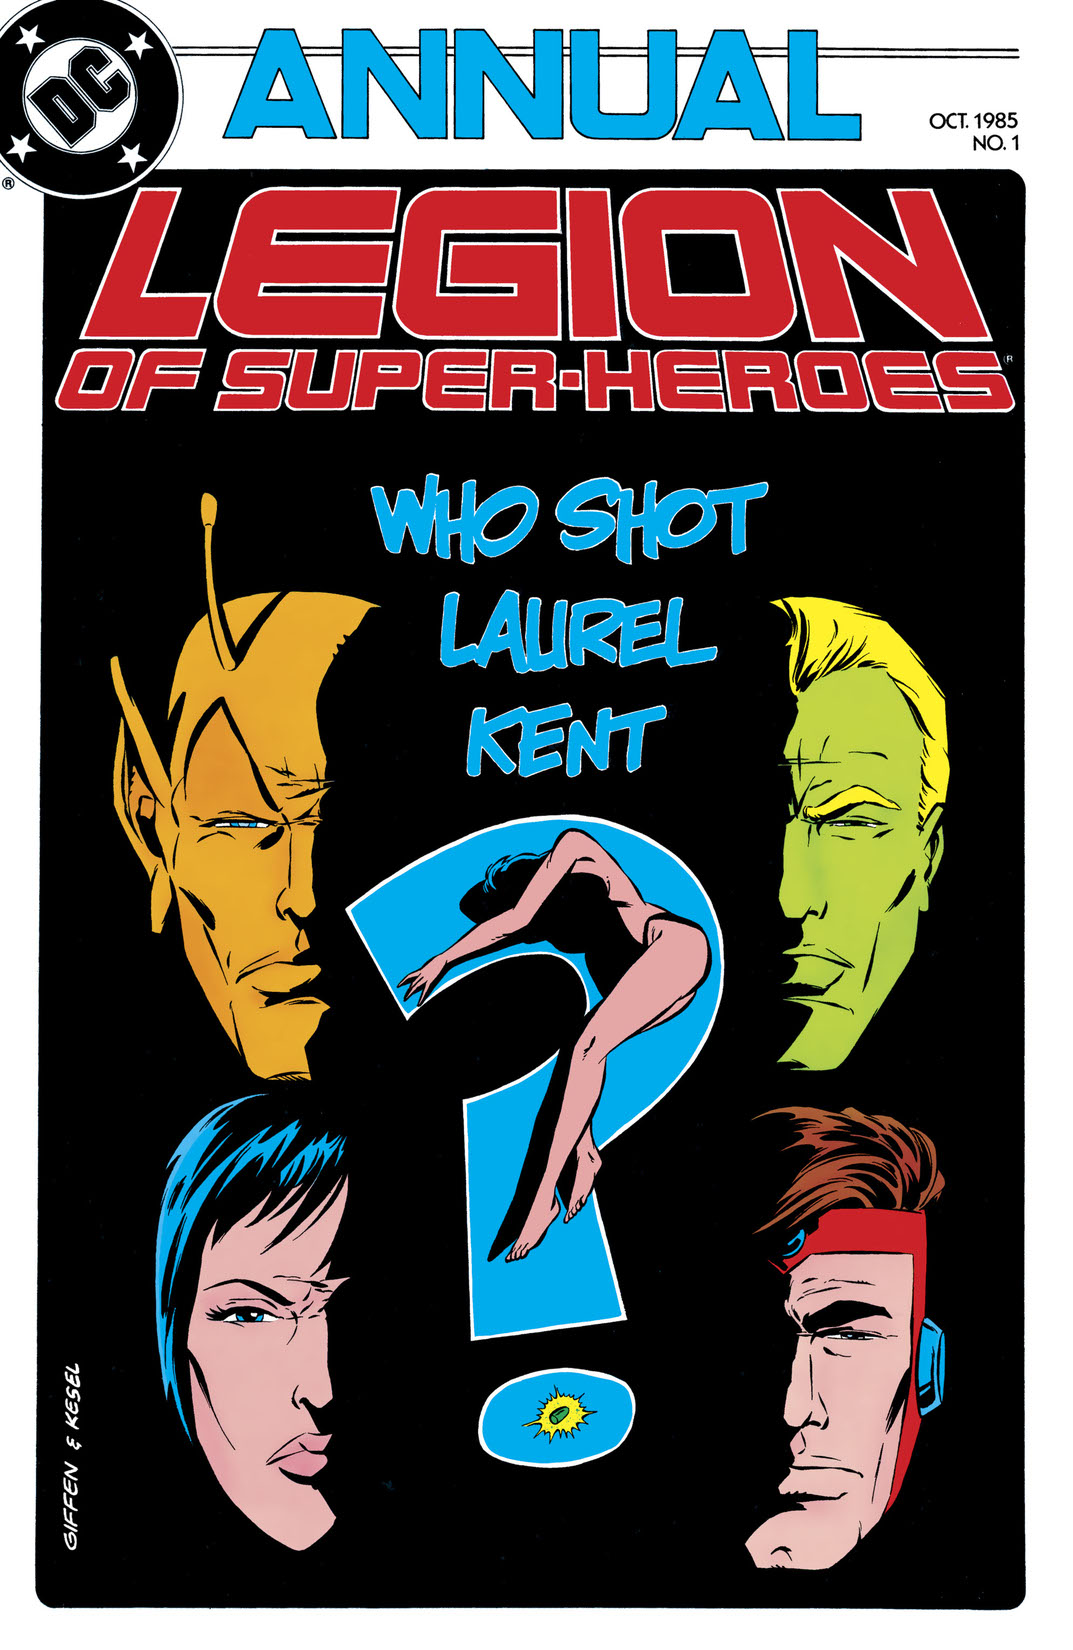 Legion of Super-Heroes Annual (1984-) #1 preview images